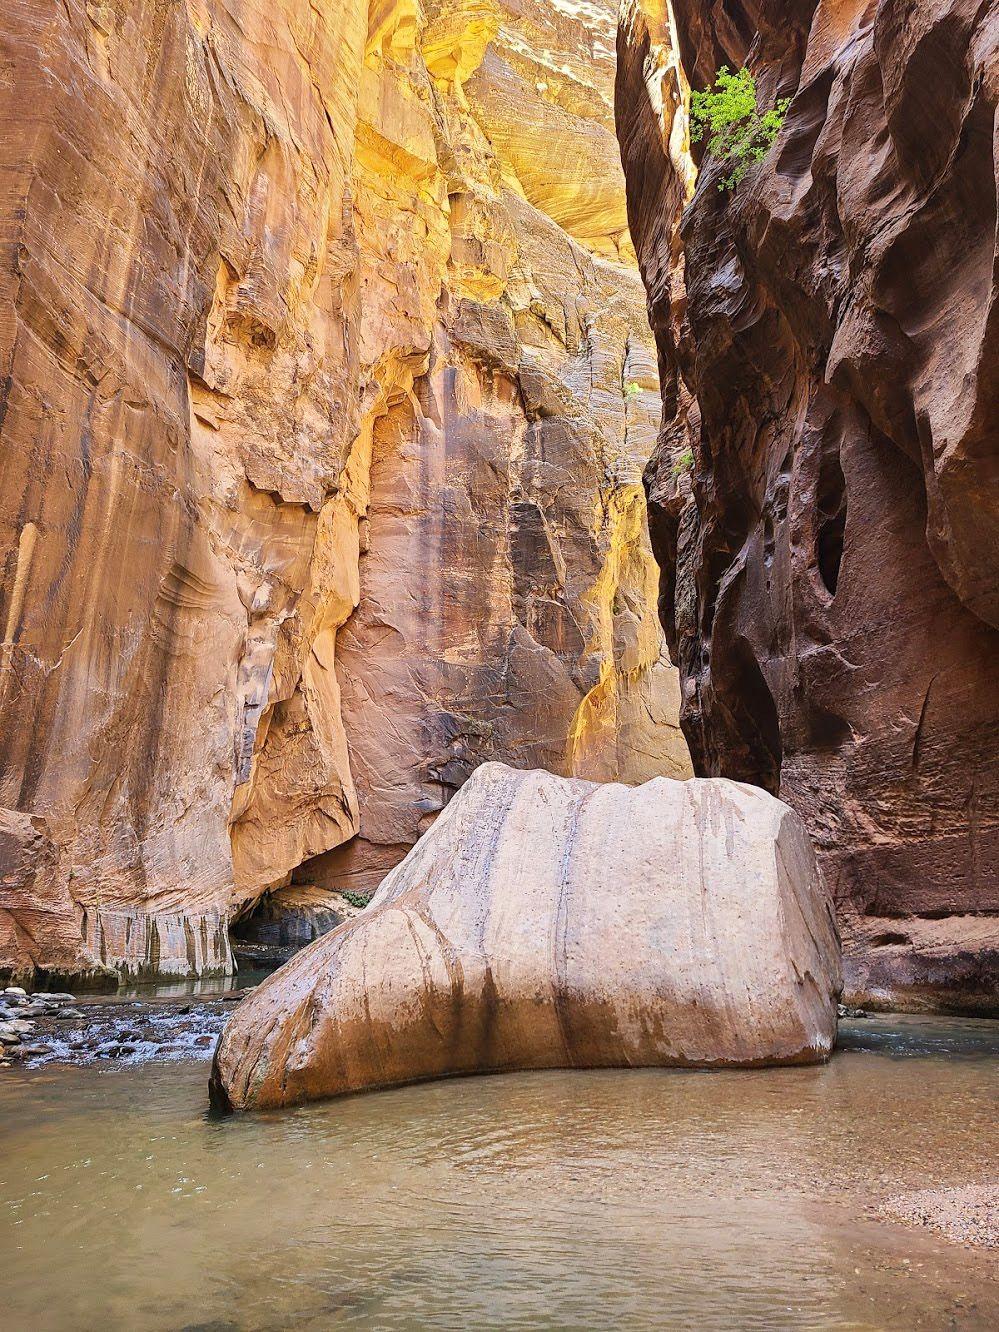 A giant boulder in the middle of the water with towering canyon walls above it.